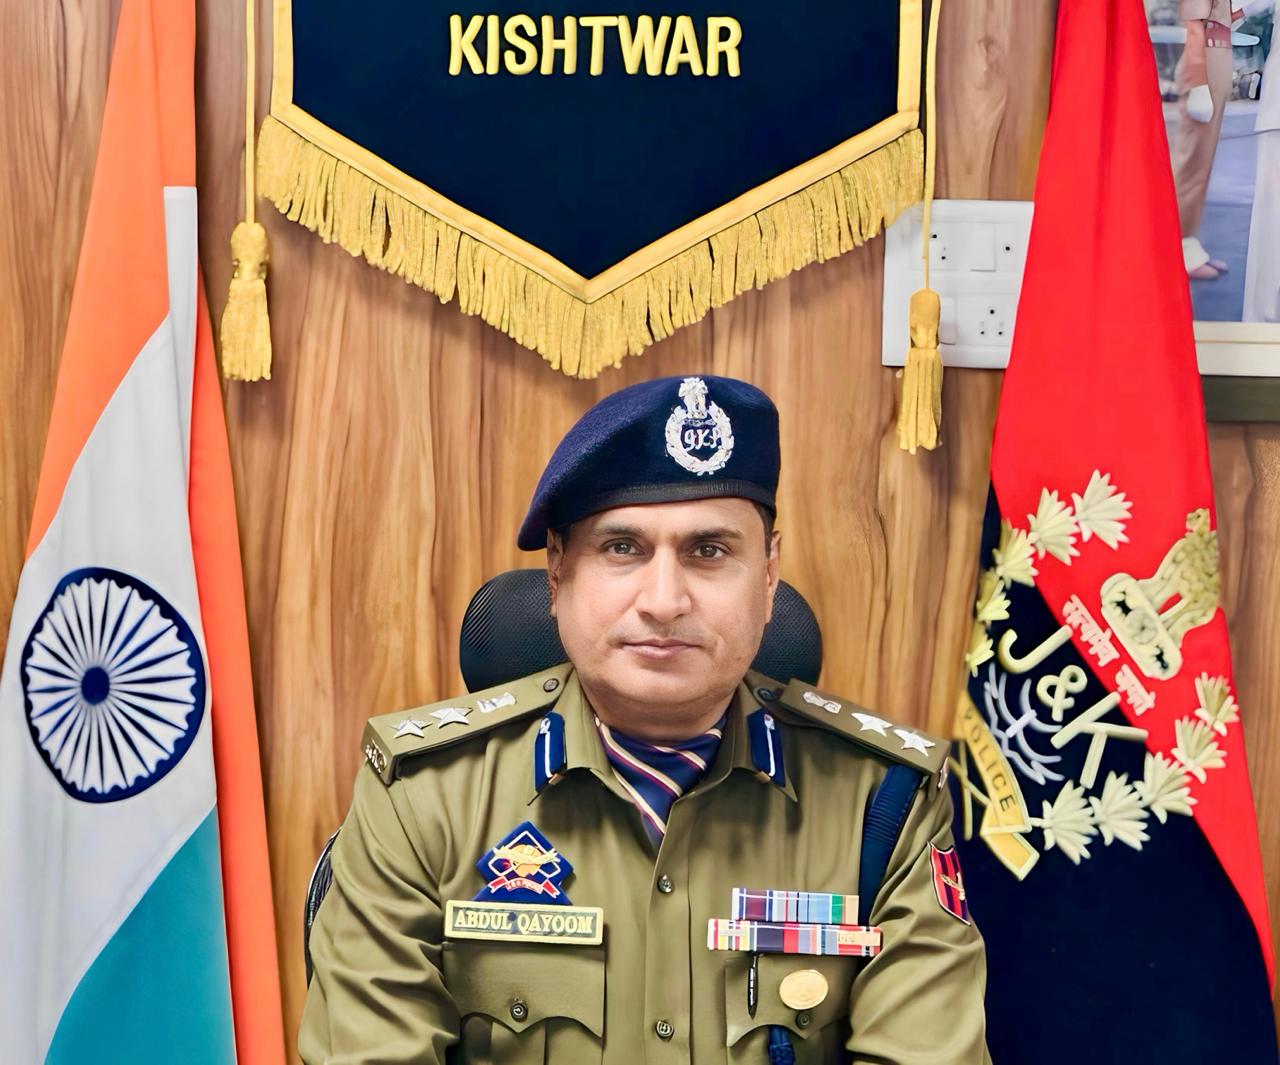 'SSP Kishtwar Abdul Qayoom greets people on the auspicious occasion of HOLI. He has extended HOLI greetings to the people of District Kishtwar, all ranks of J&K Police & Security Forces, Families of Martyrs & Police Personnel. He wished a very Happy and colorful HOLI to all.'